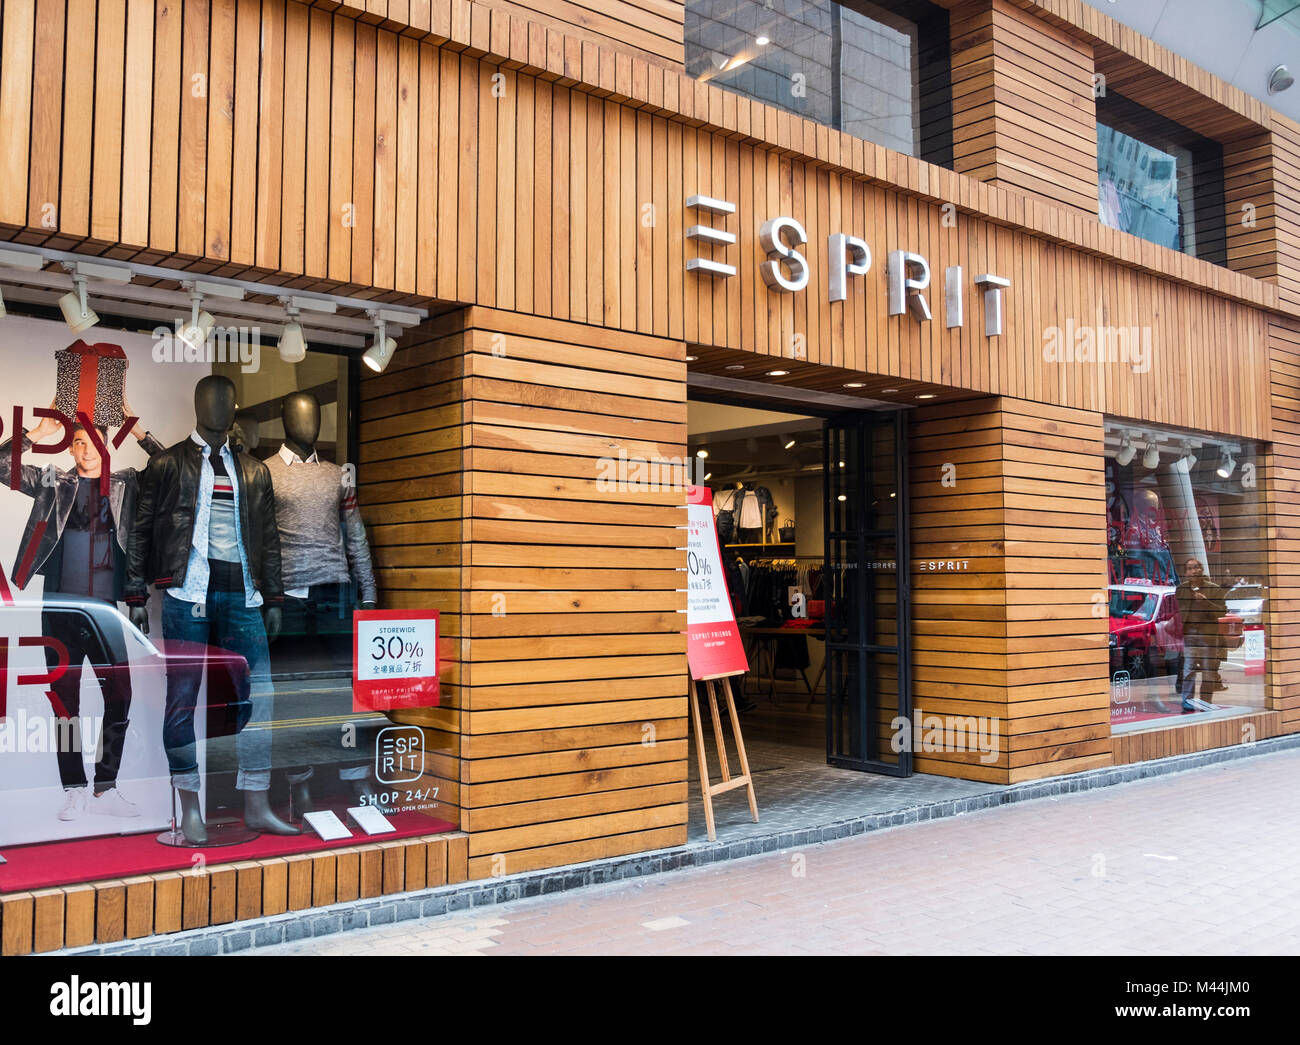 Donau gazon vonk Hong Kong - February 11, 2018: Esprit shop in Hong Kong. Esprit is a  manufacturer of clothing, footwear, accessories, jewelery Stock Photo -  Alamy